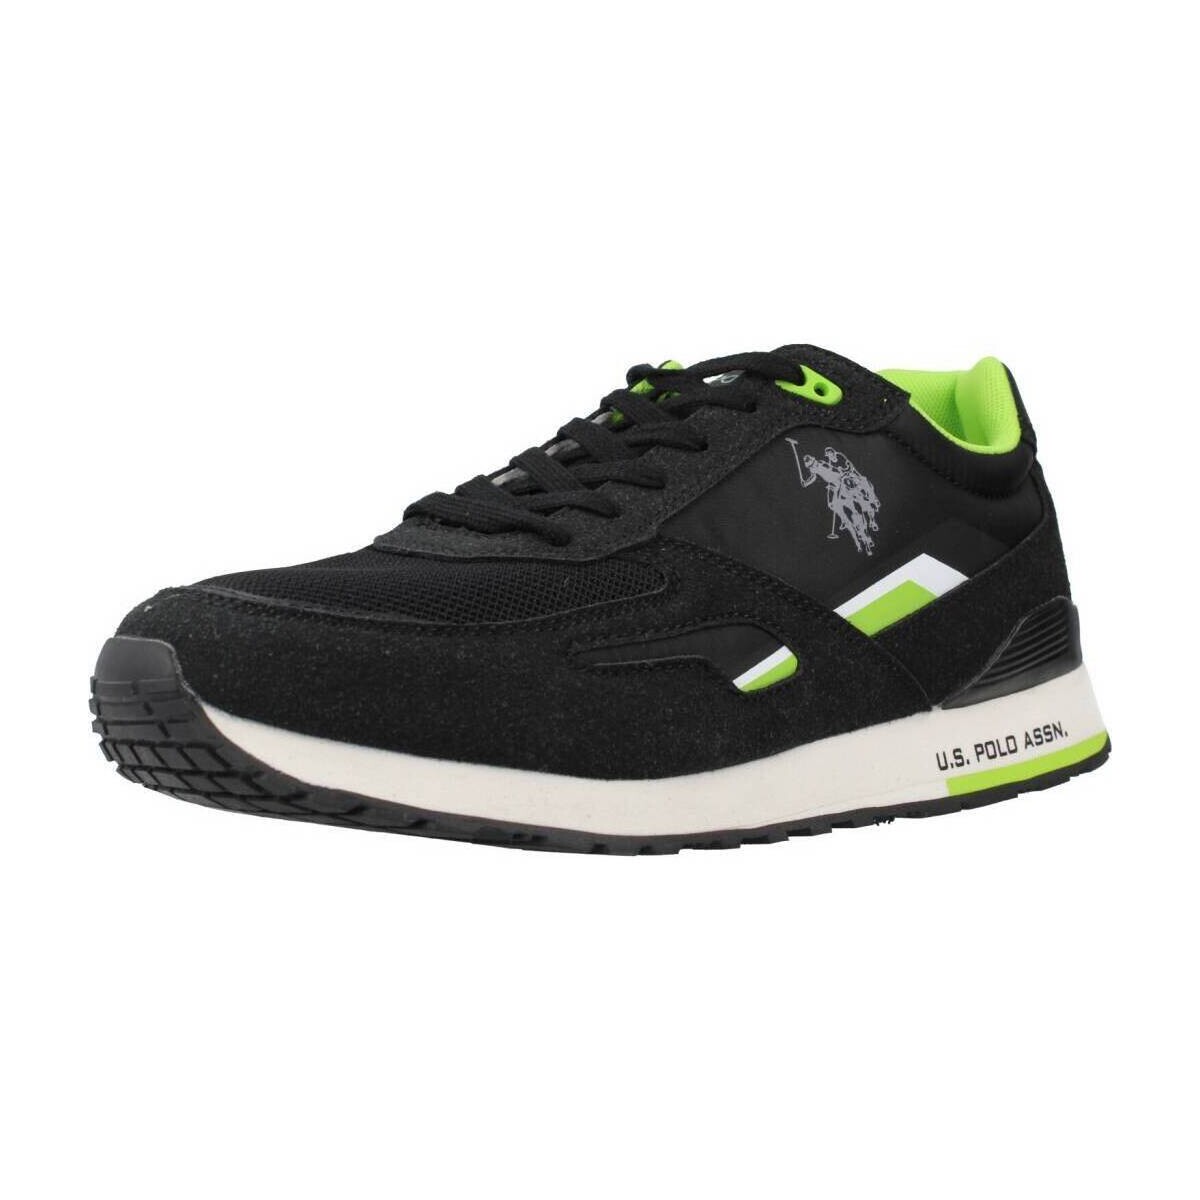 Xαμηλά Sneakers U.S Polo Assn. TABRY003M